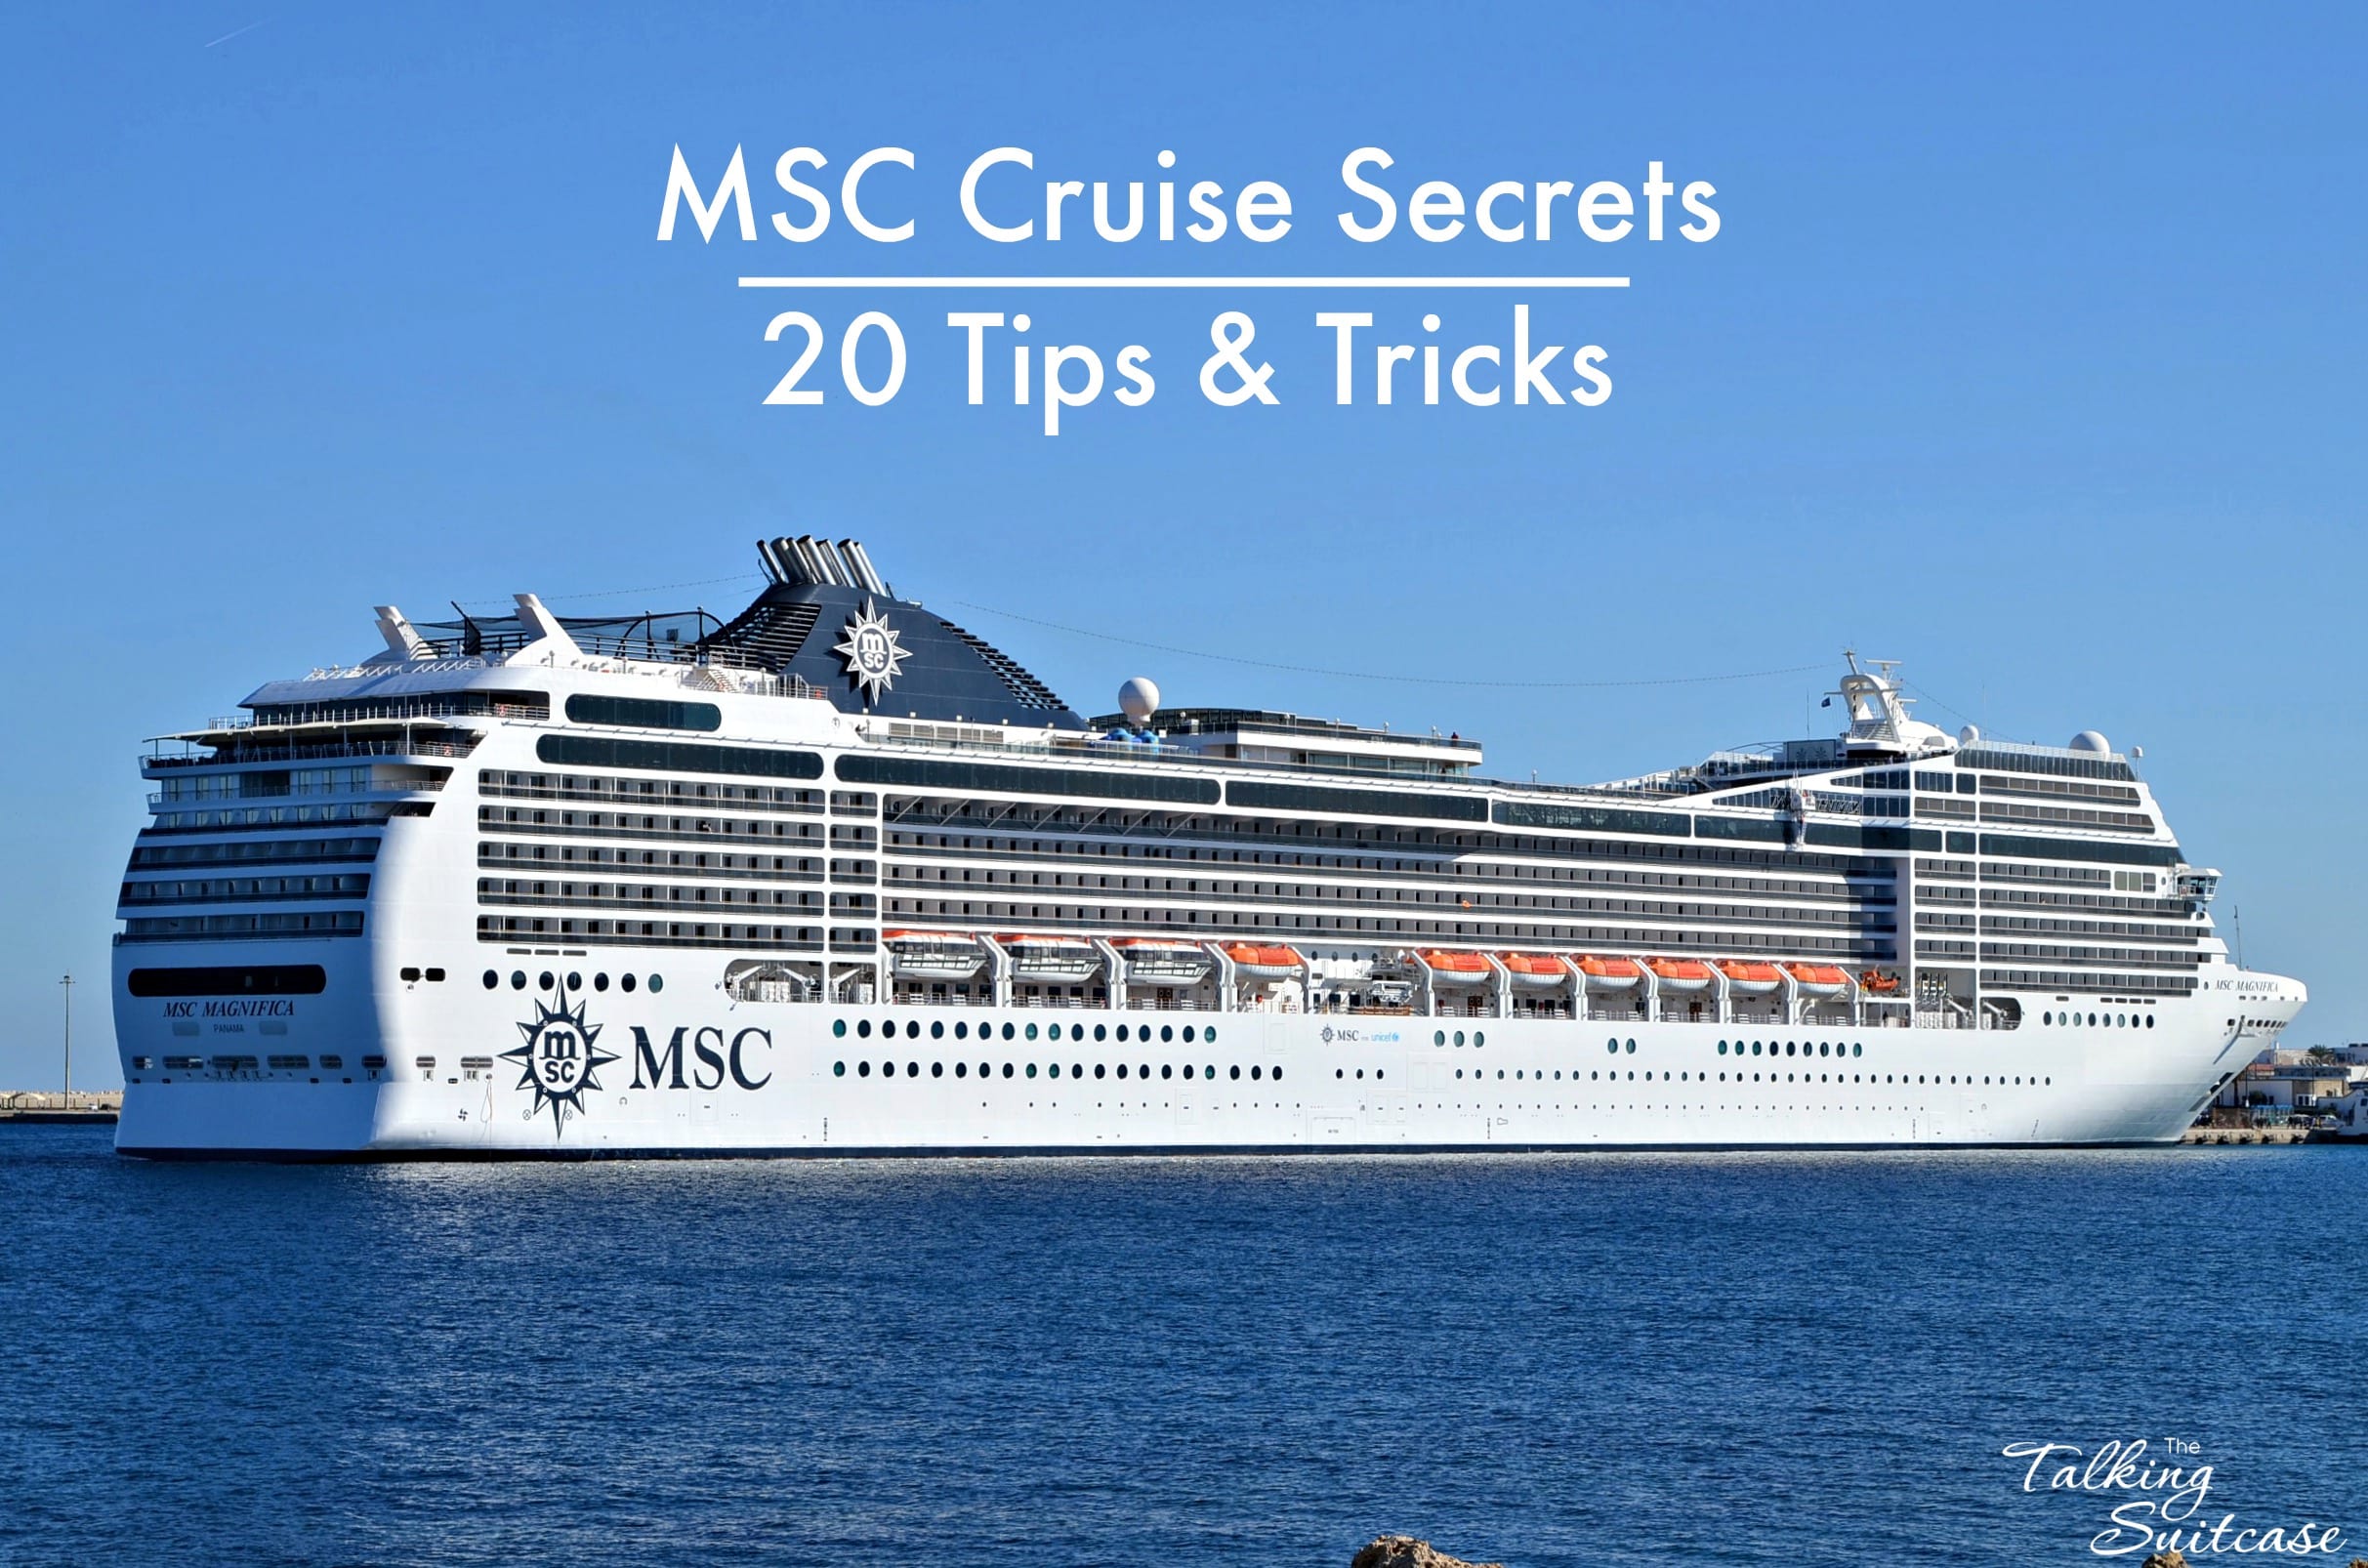 MSC Cruise Travel Secrets: 20 Tips & Tricks for Sailing with MSC